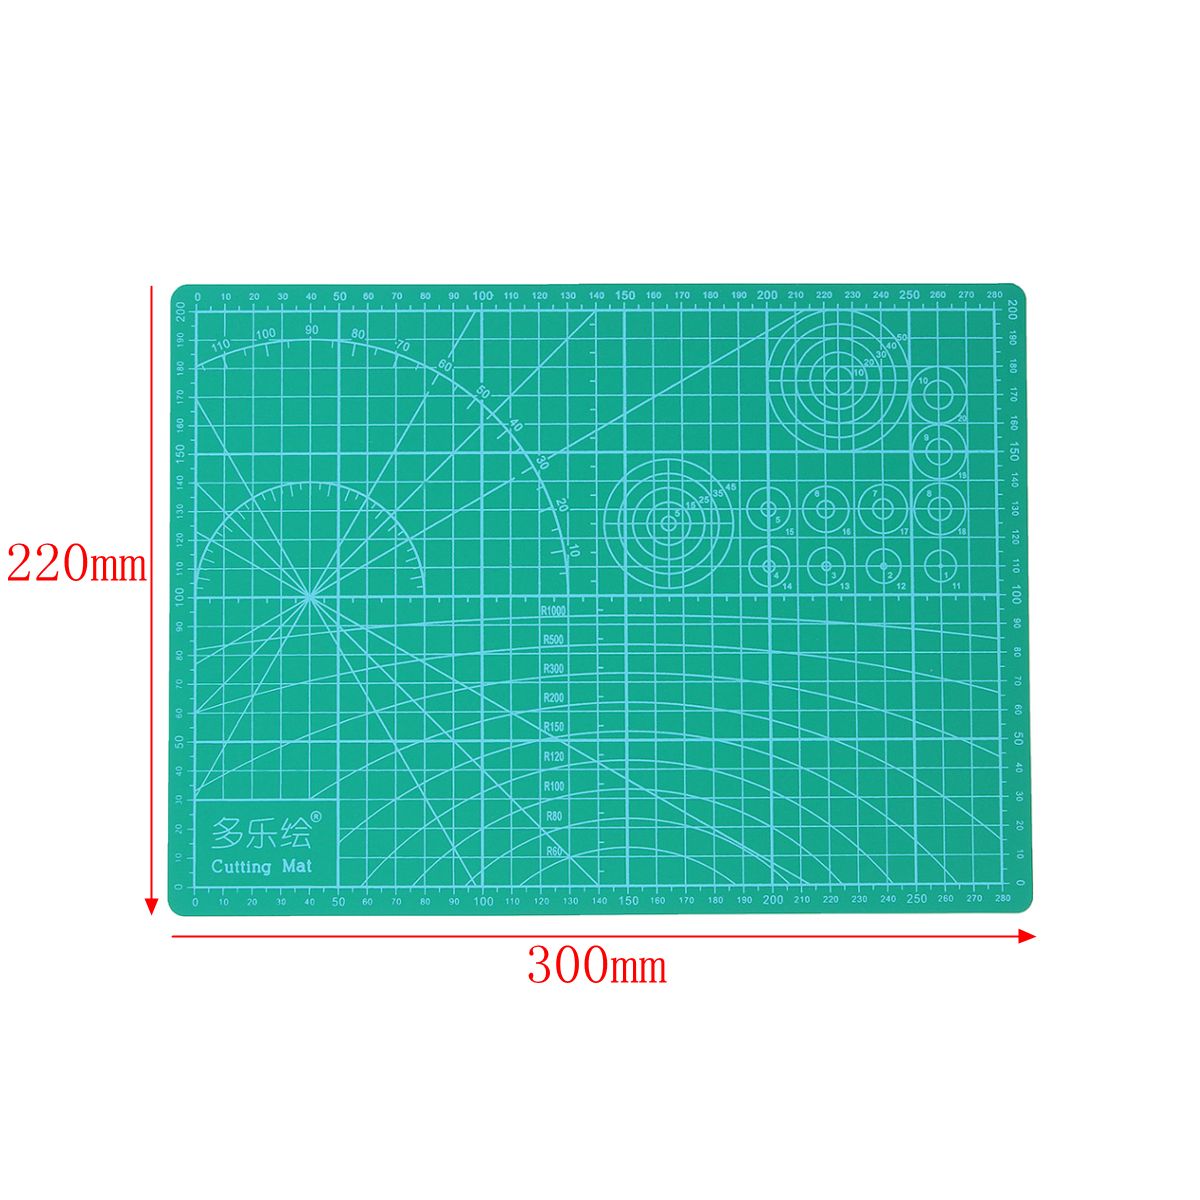 A4-Cutting-Craft-Mat-Double-sided-Non-Slip-Printed-Grid-Quality-Cutting-Soldering-Practice-Board-22c-1288890